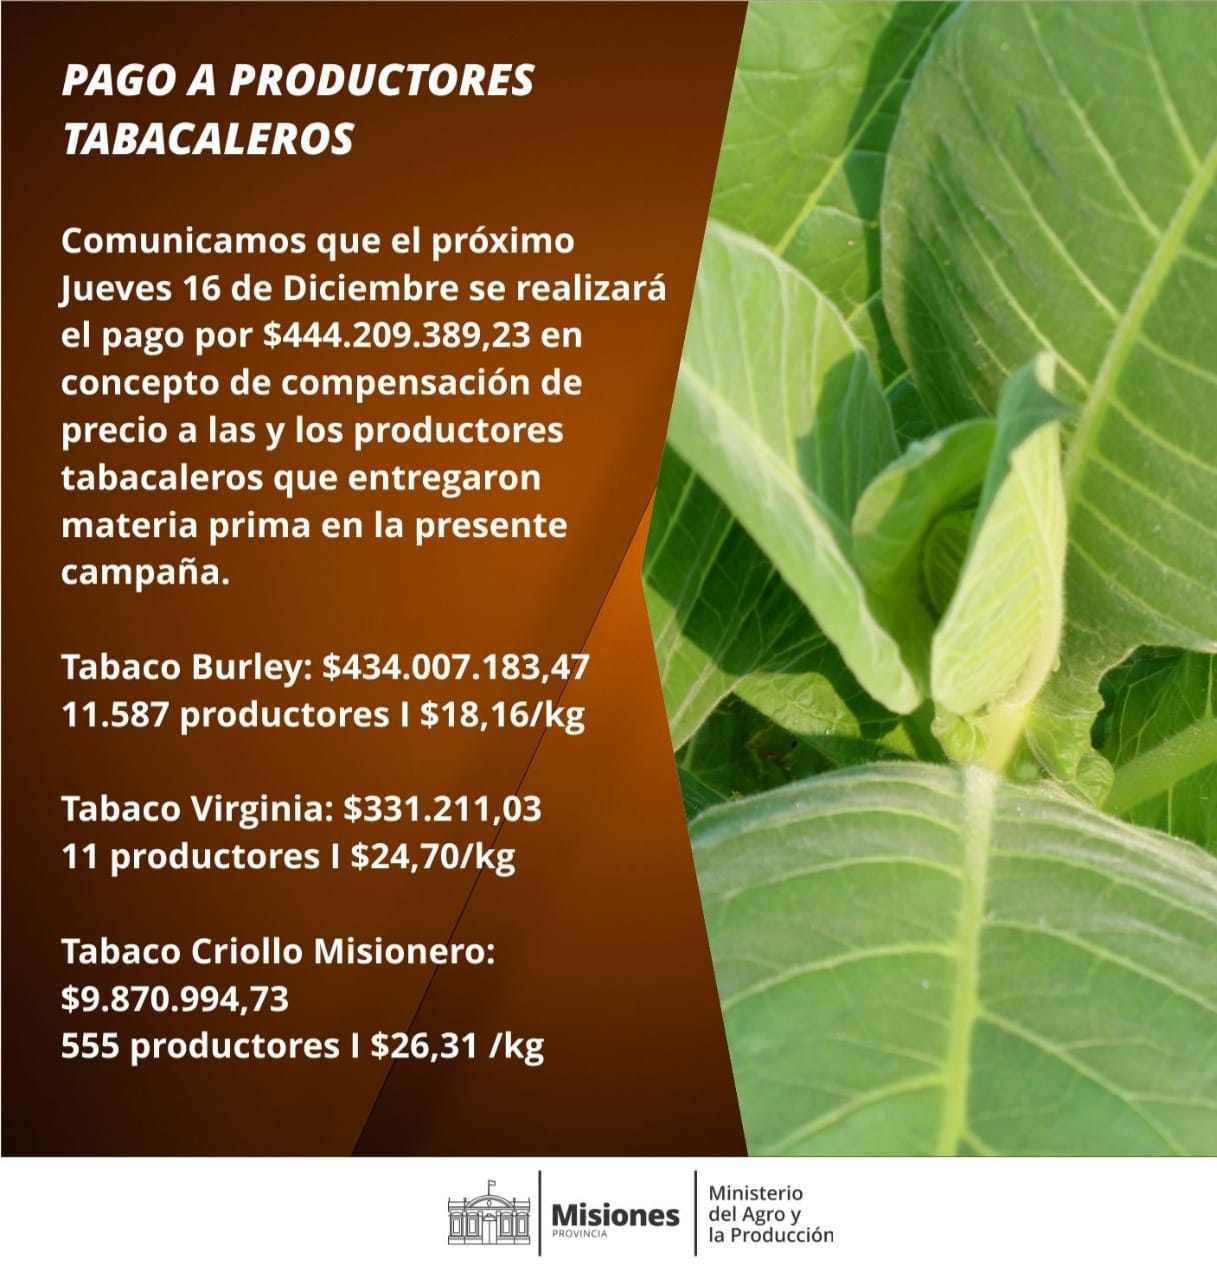 productores tabacaleros